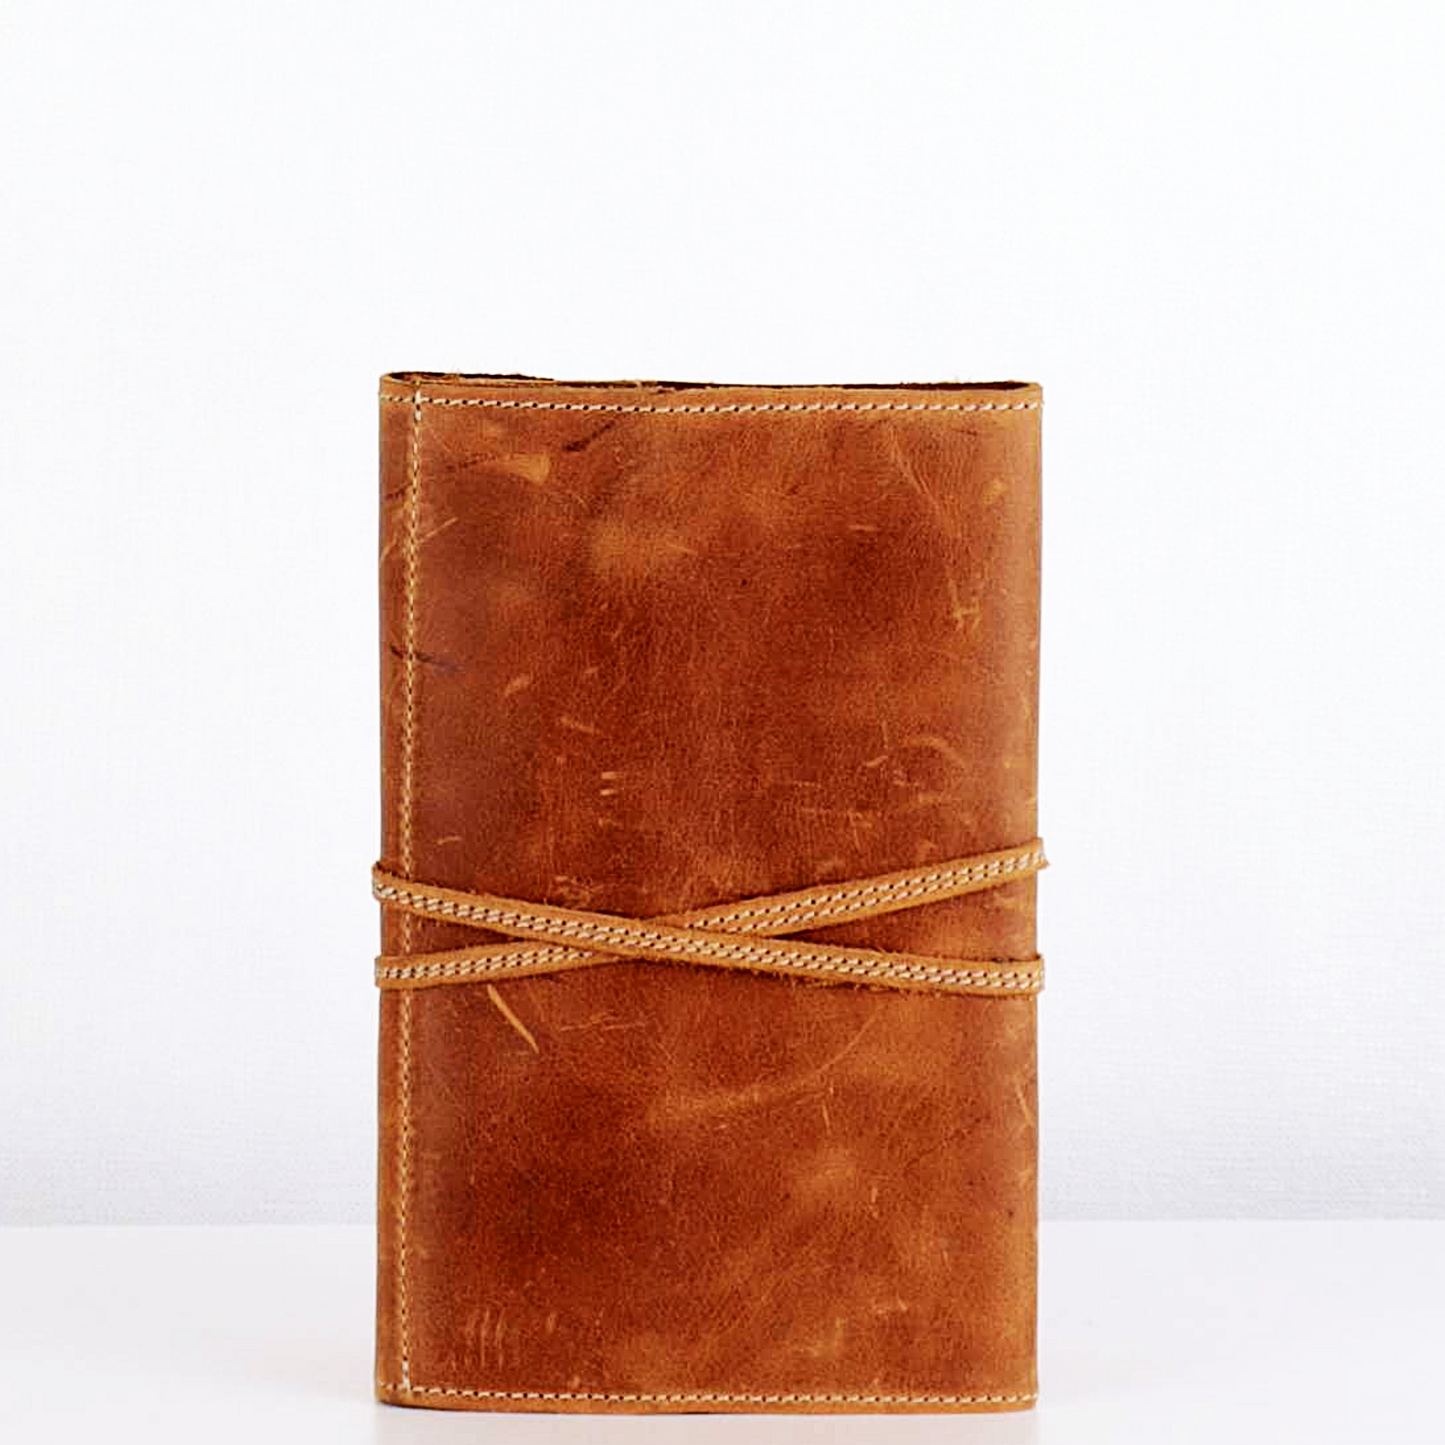 A5 Wrap Leather Journal